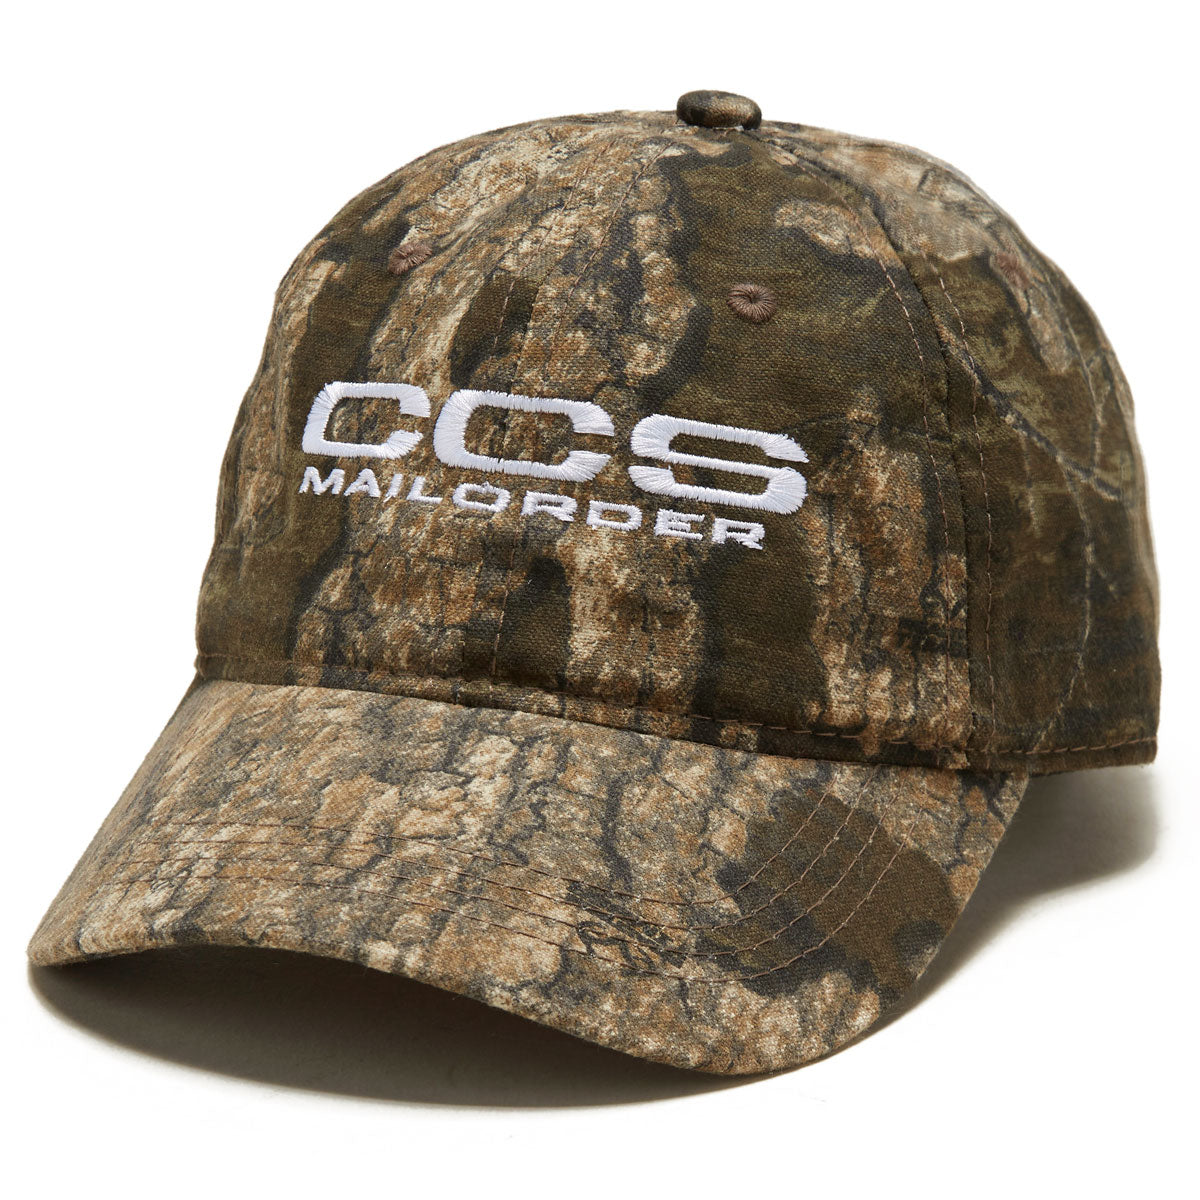 CCS x Realtree Embroidered Mailorder Hat - Timber image 1